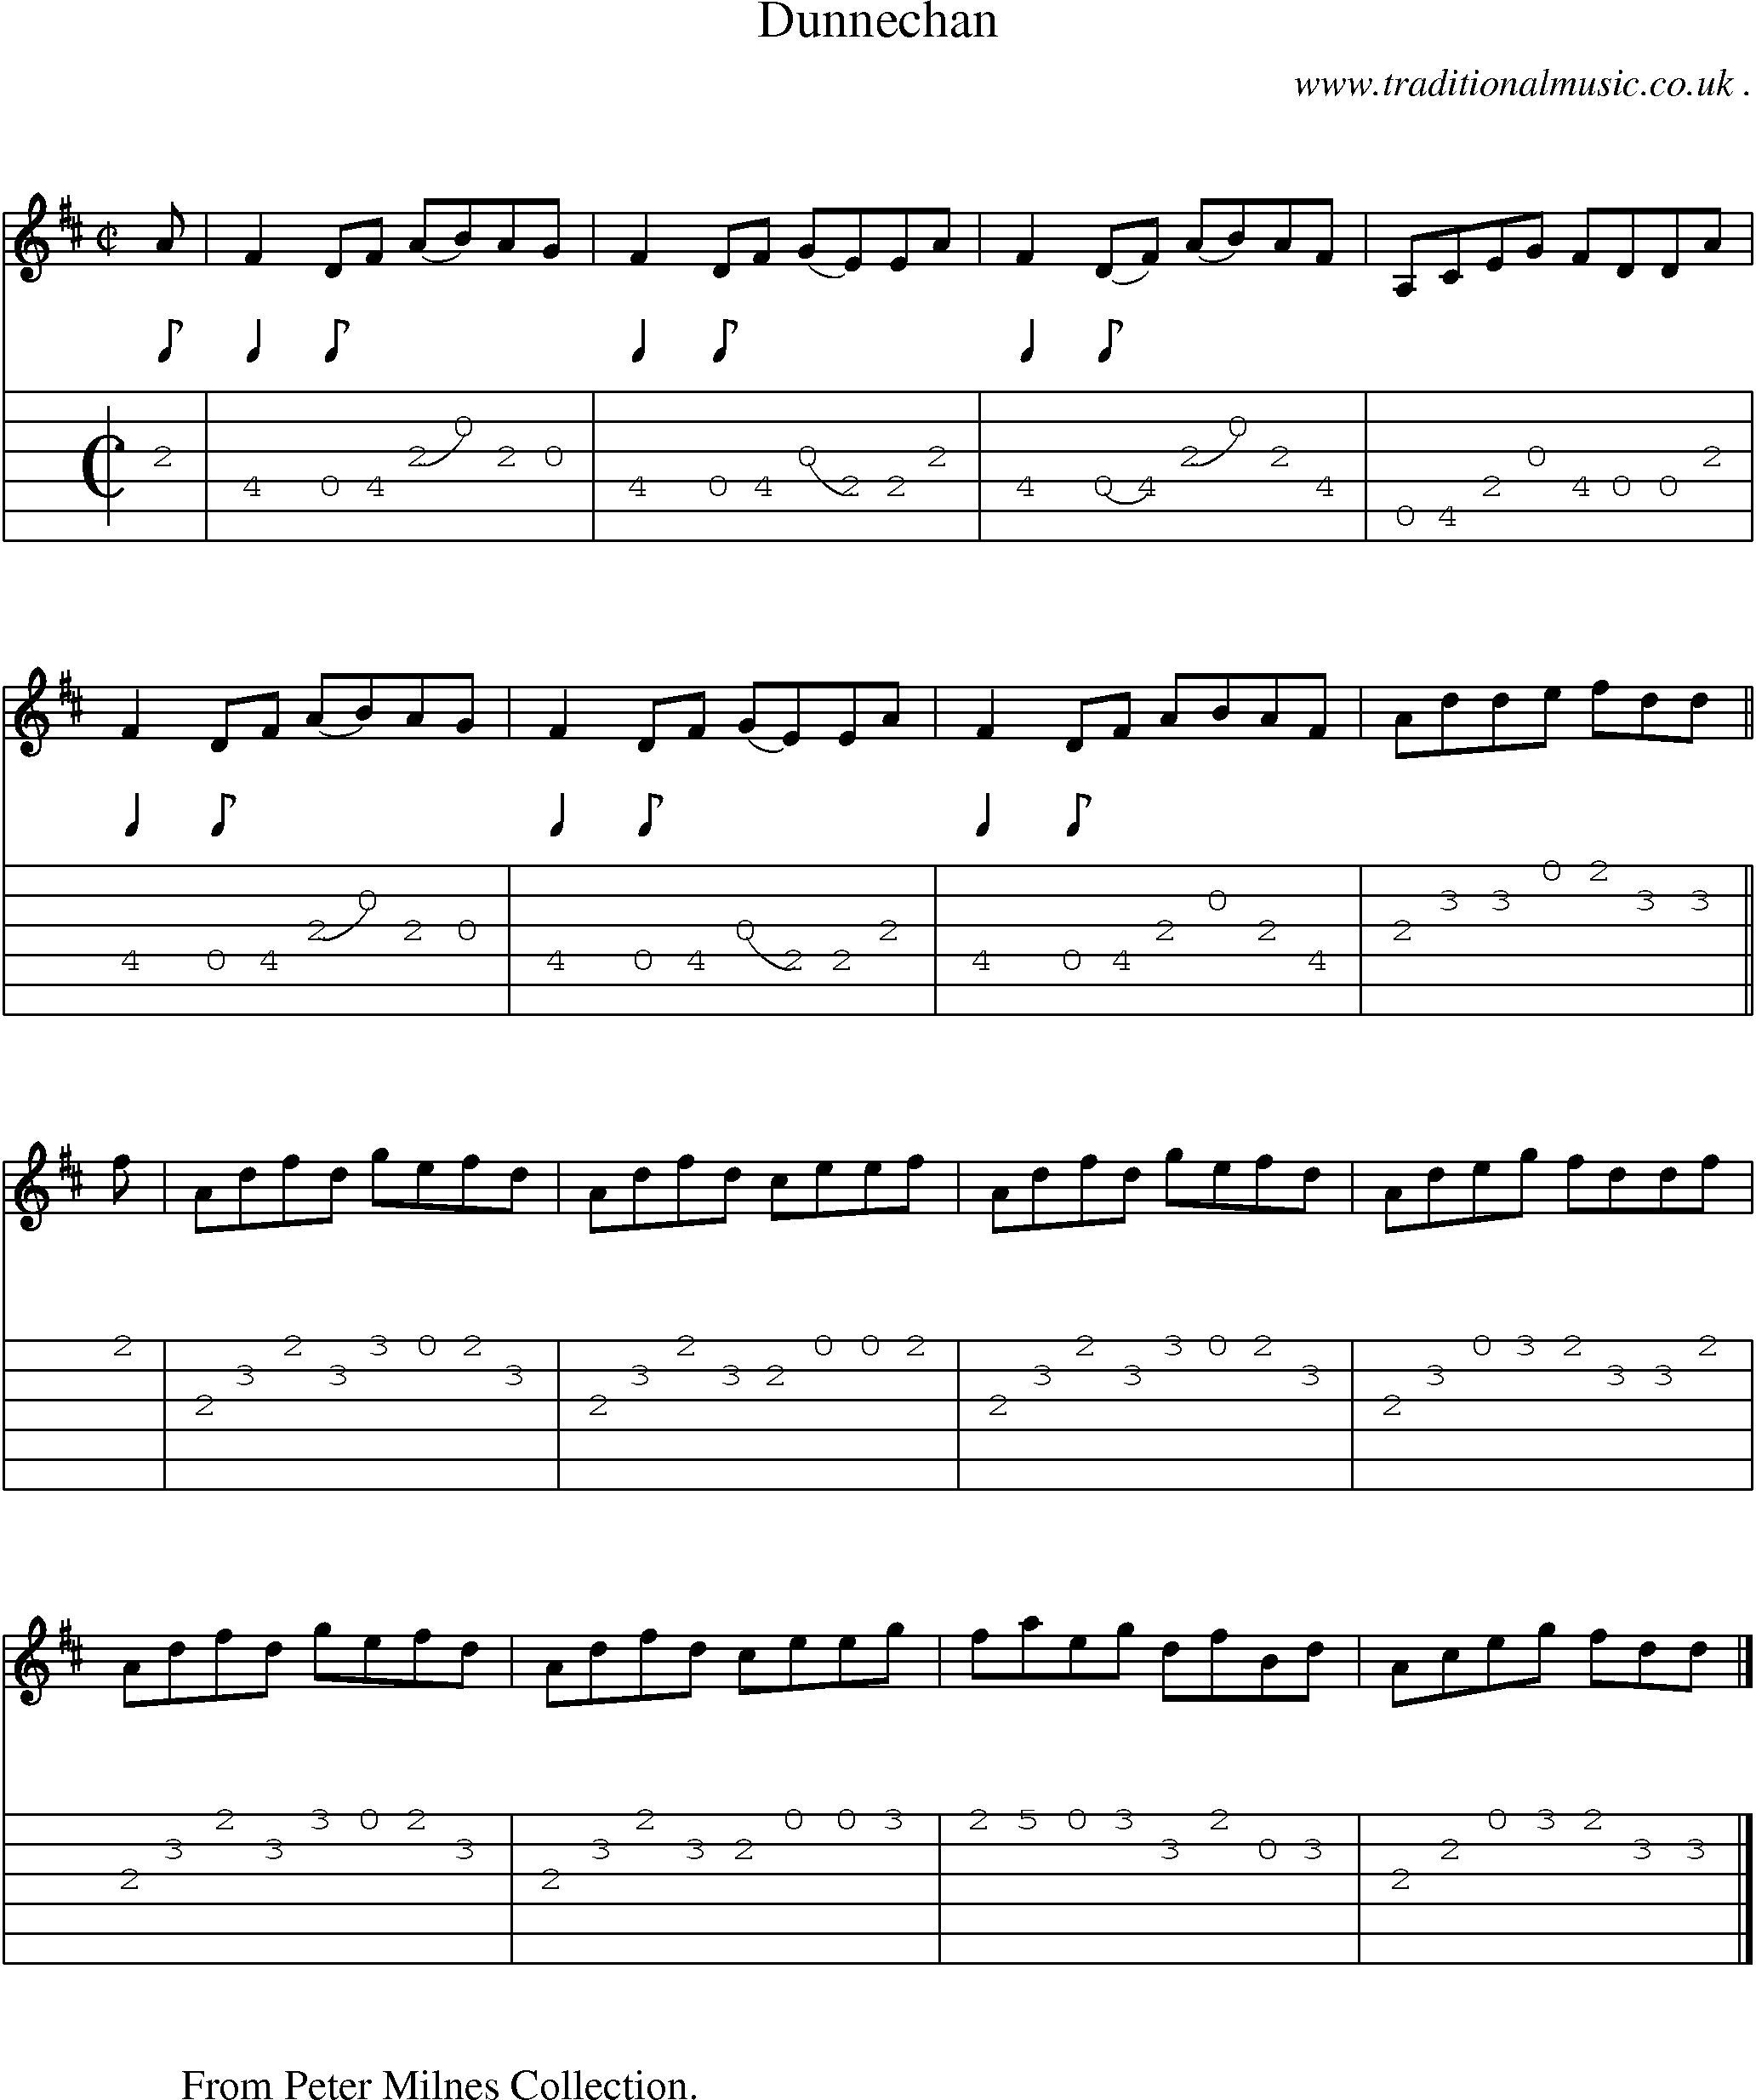 Sheet-music  score, Chords and Guitar Tabs for Dunnechan